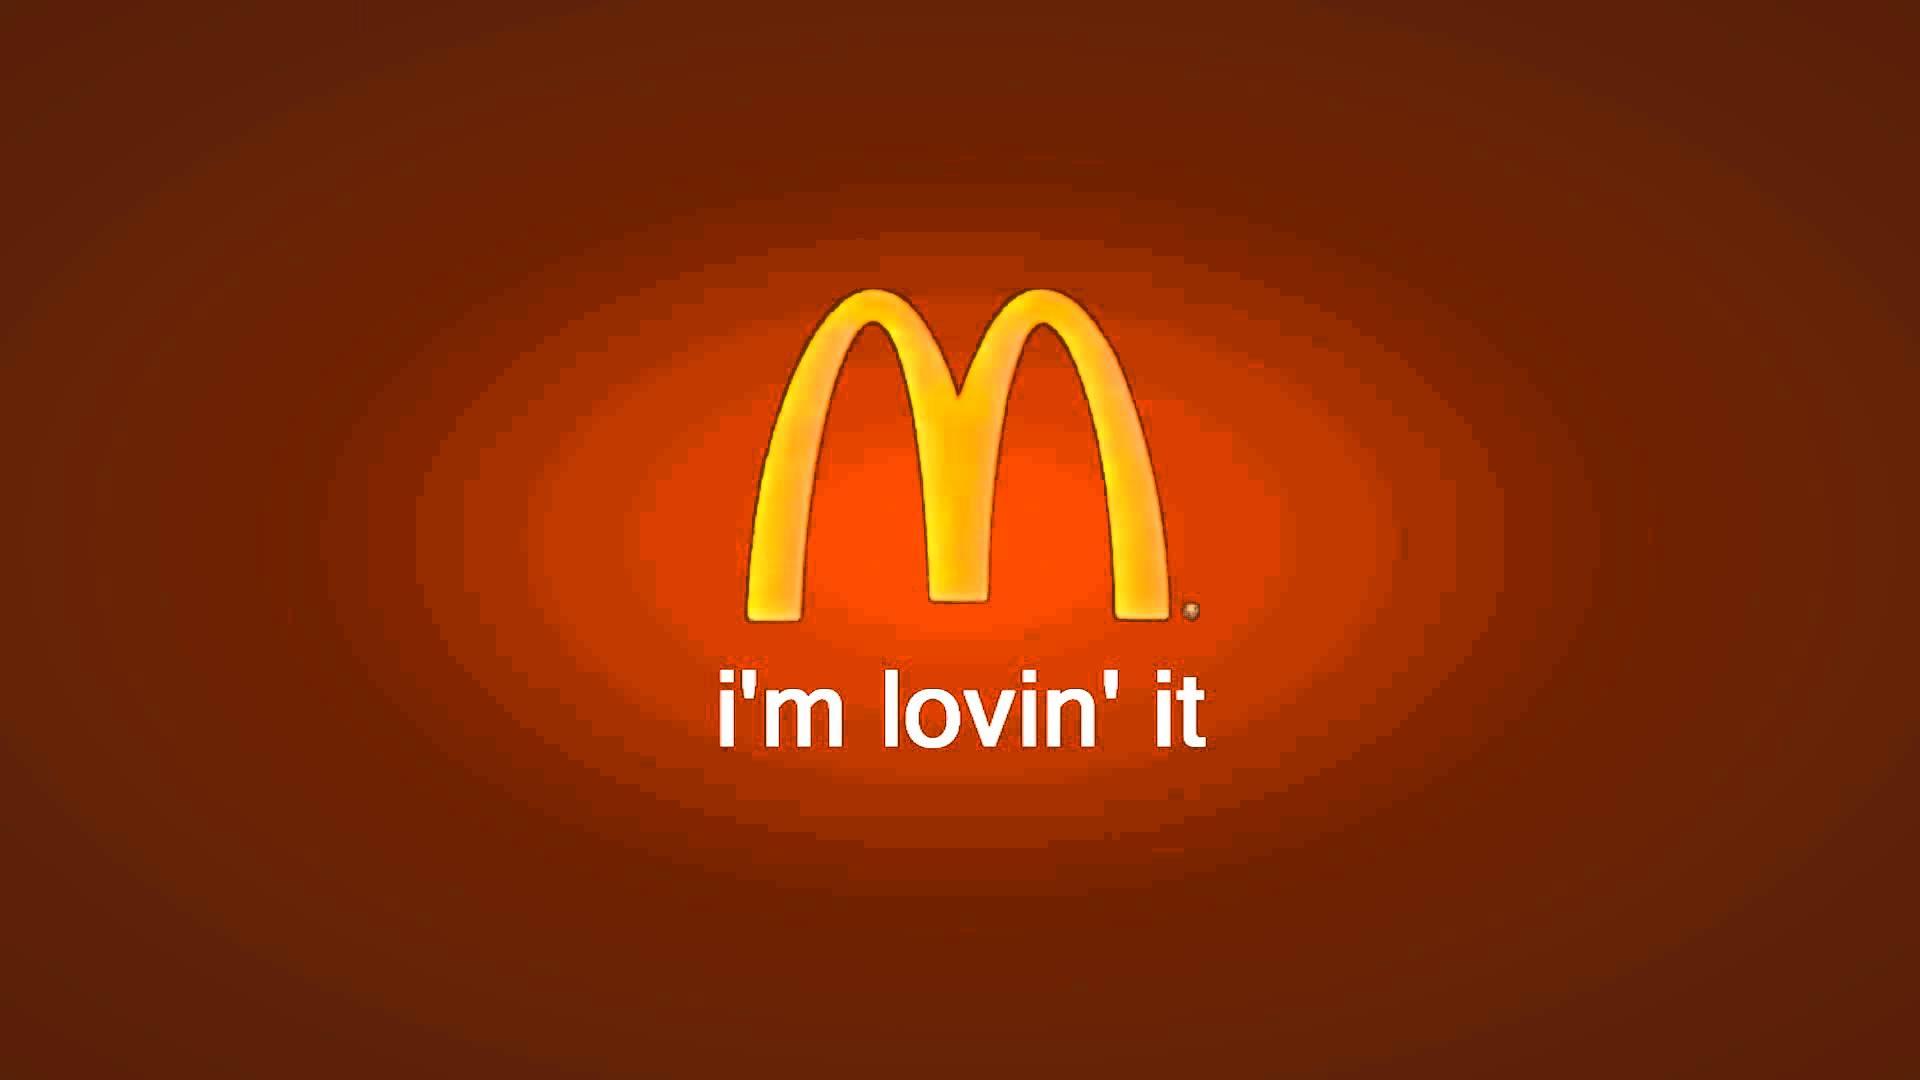 McDonalds Wallpapers Hd For Pc, McDonalds, Other